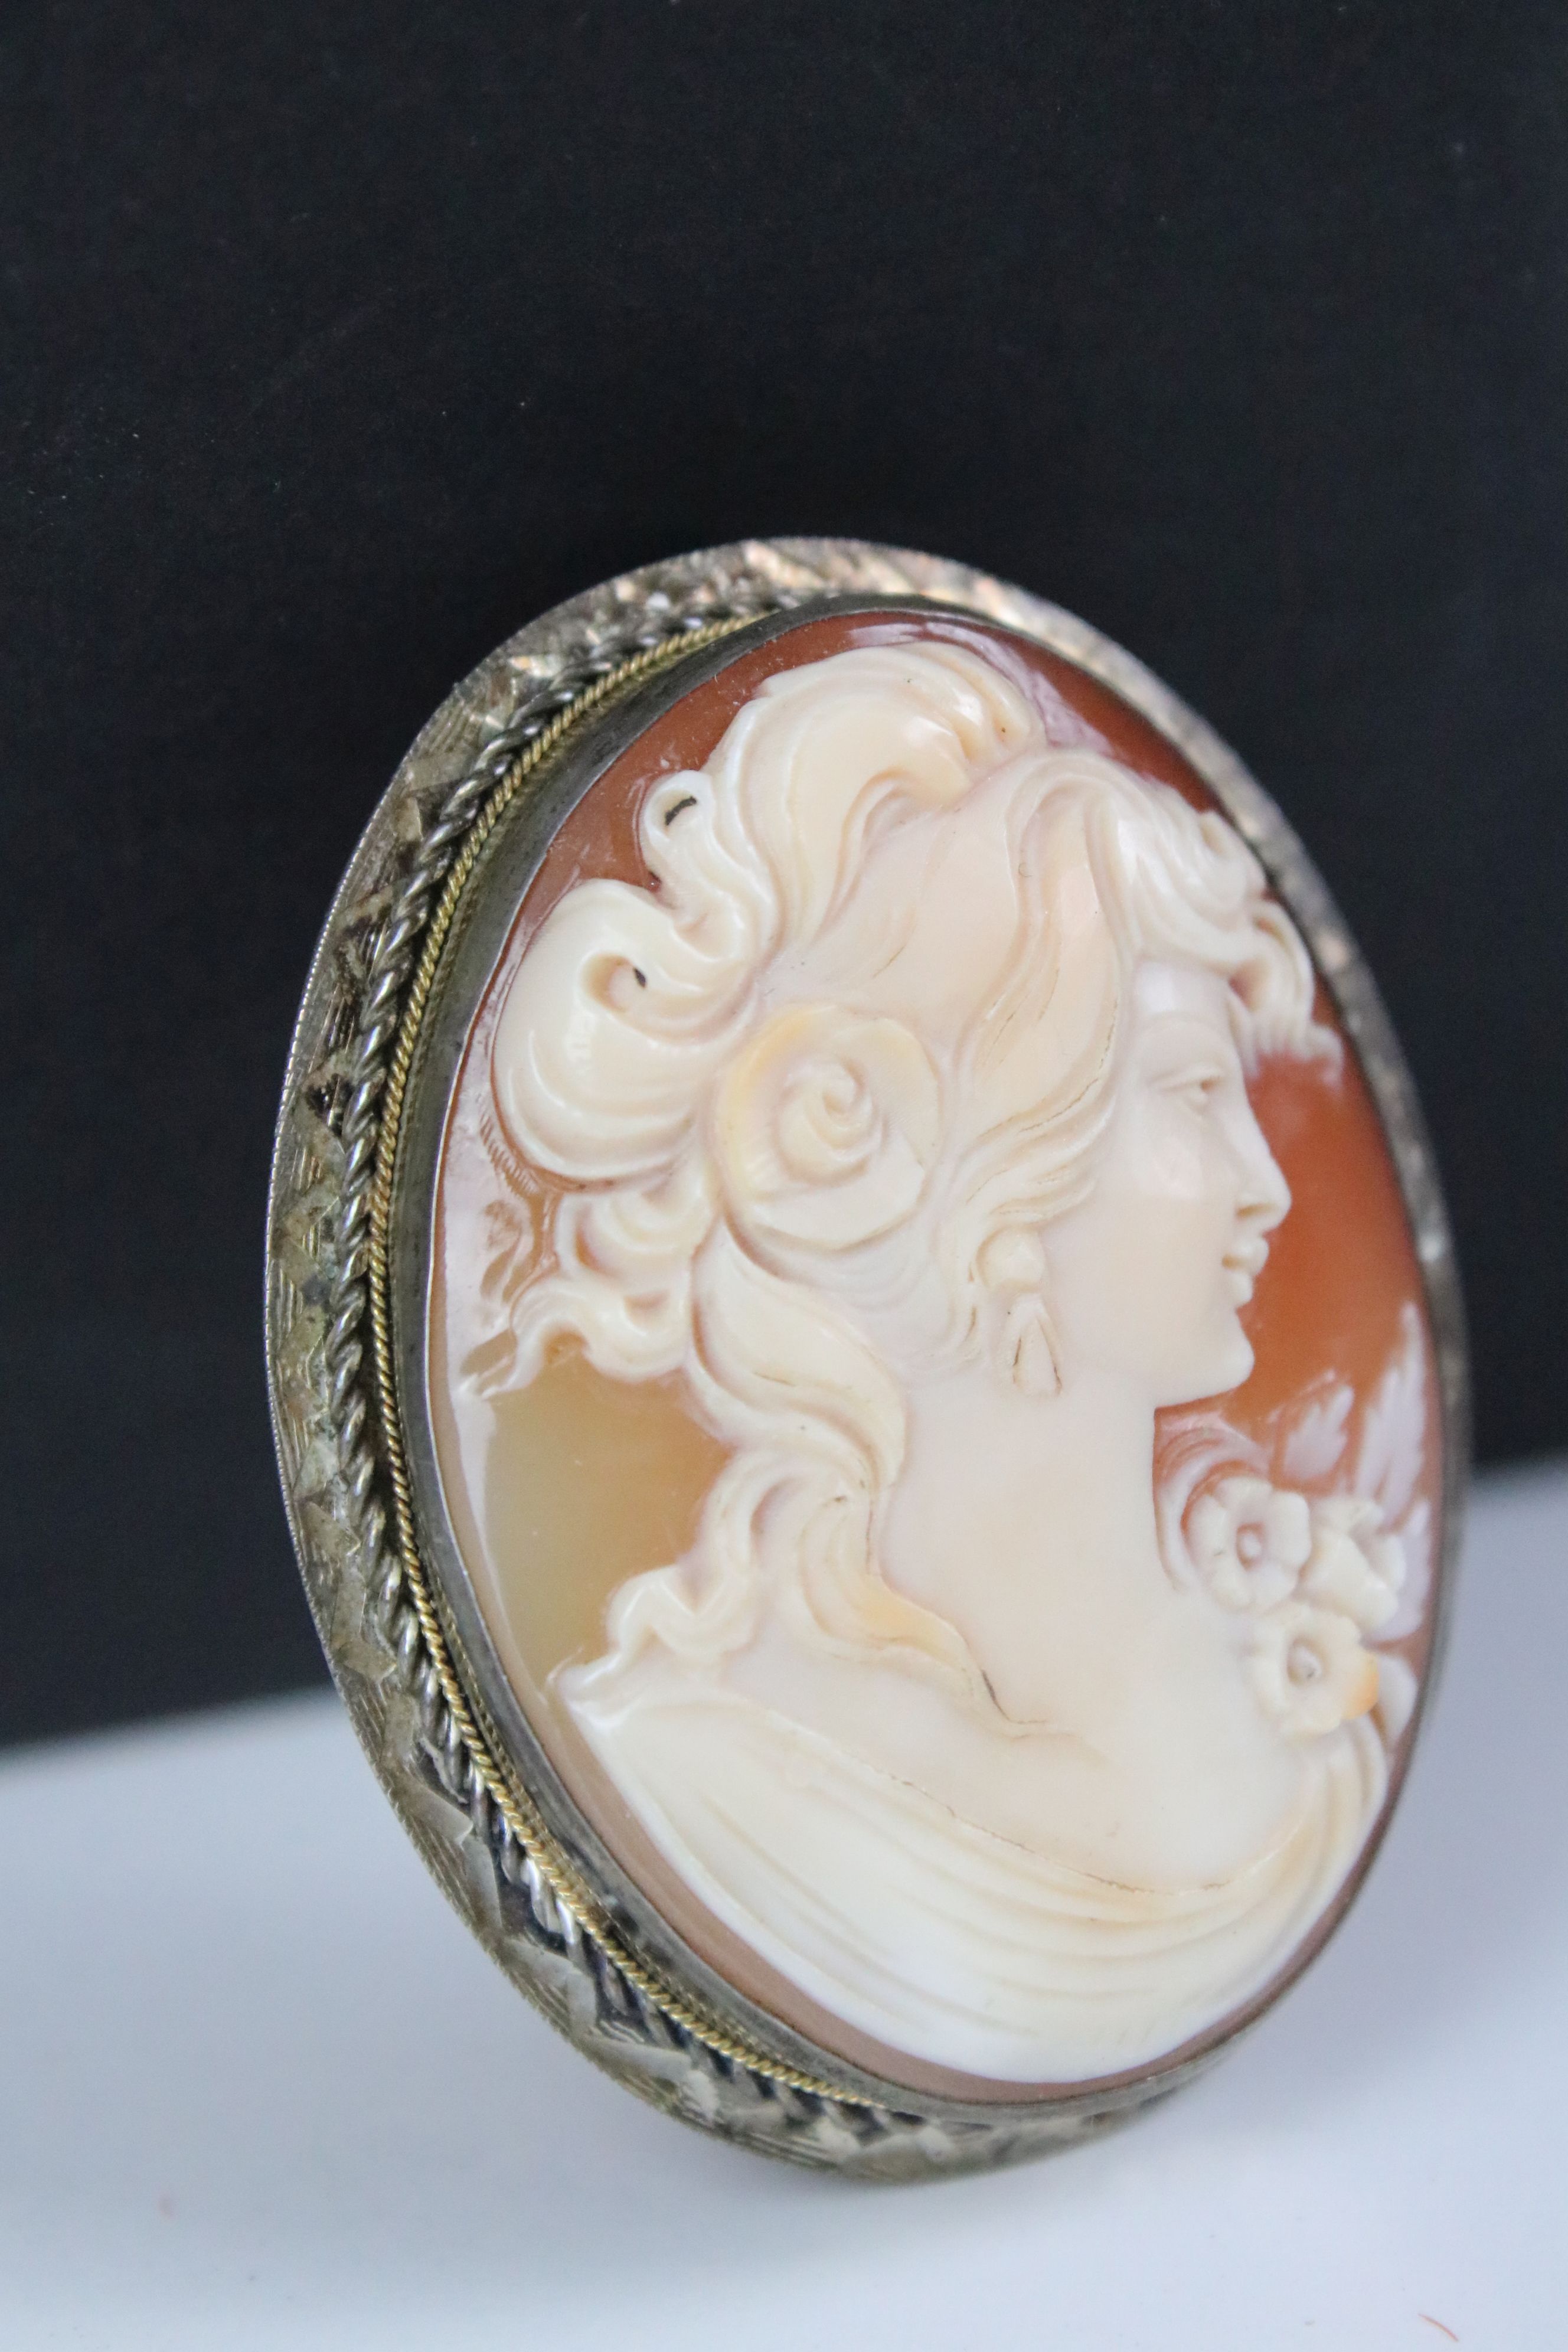 Silver mounted cameo brooch/ pendant - Image 2 of 4